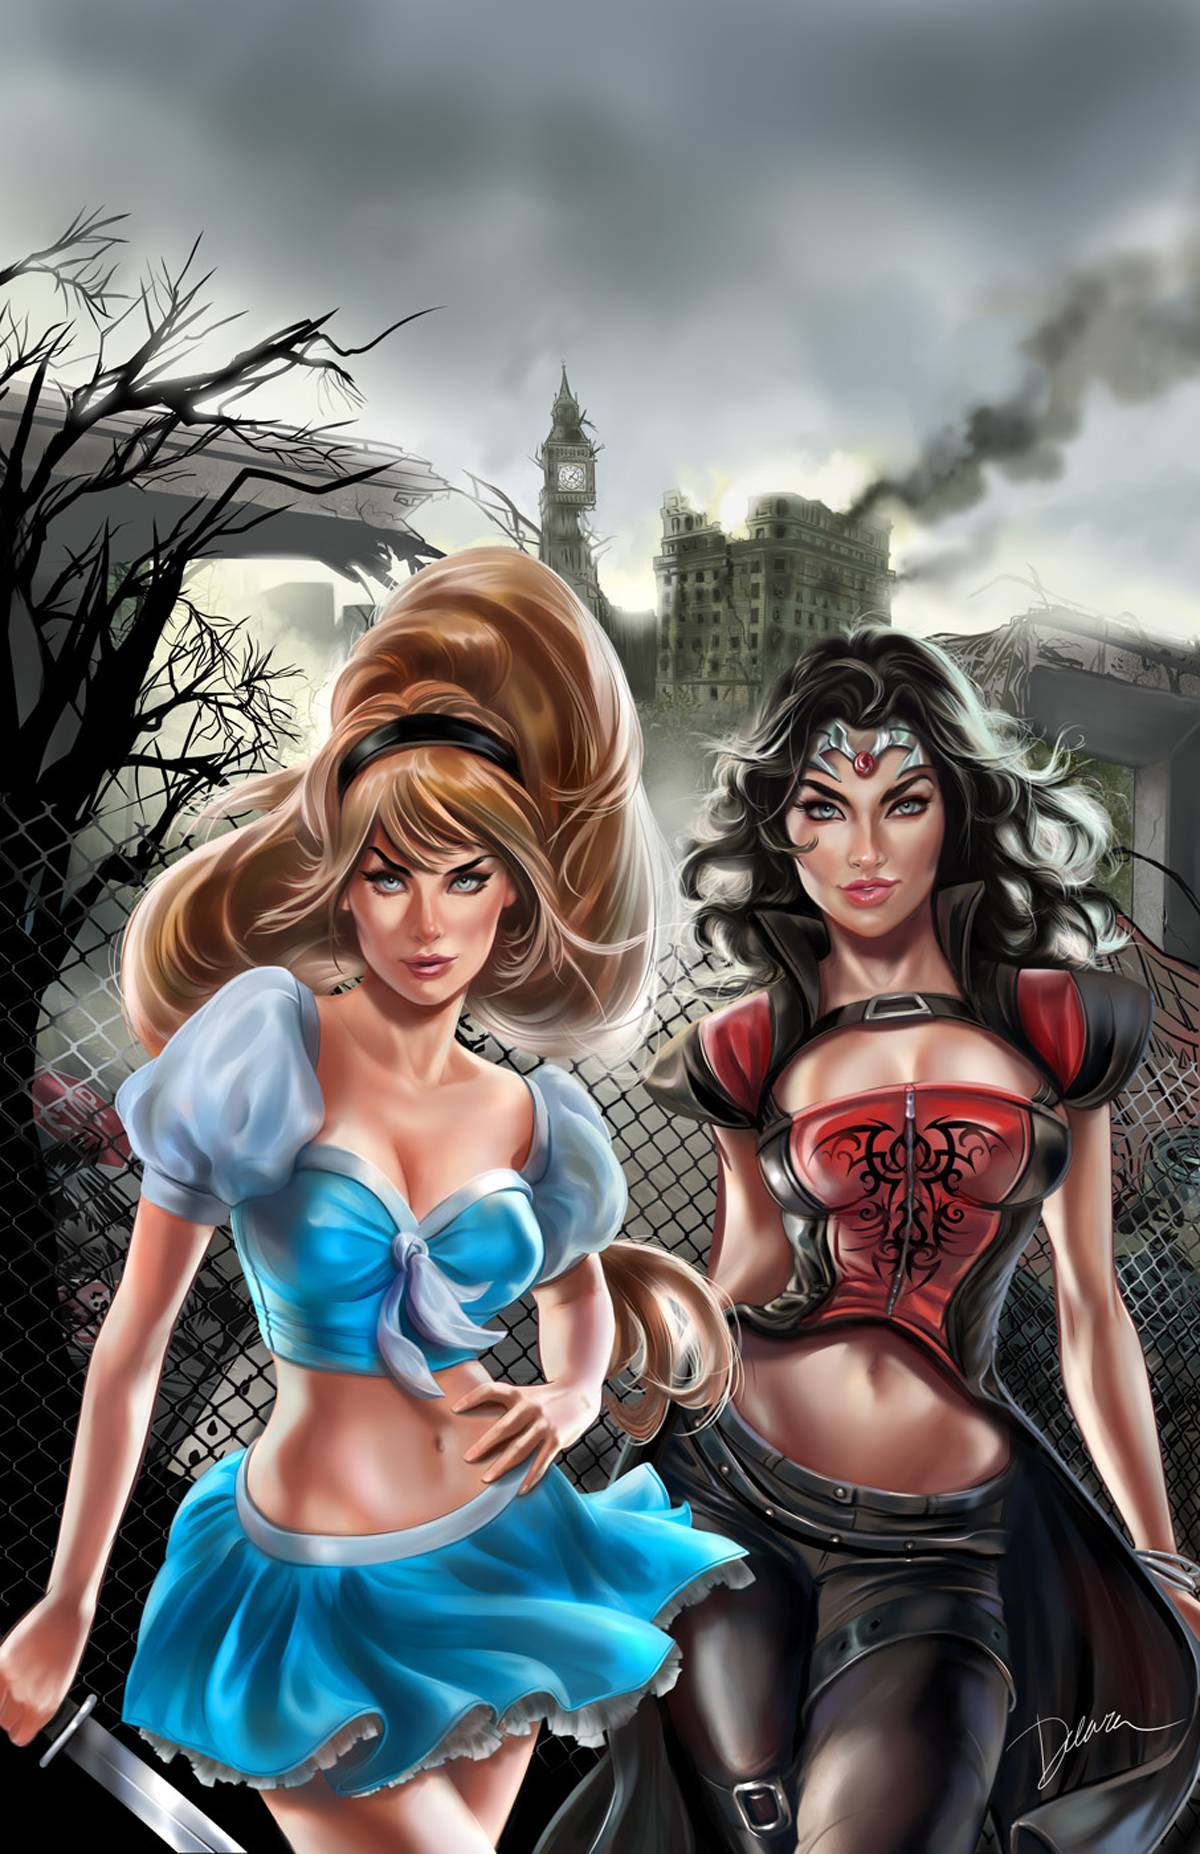 Grimm Fairy Tales: Bad Grils #1